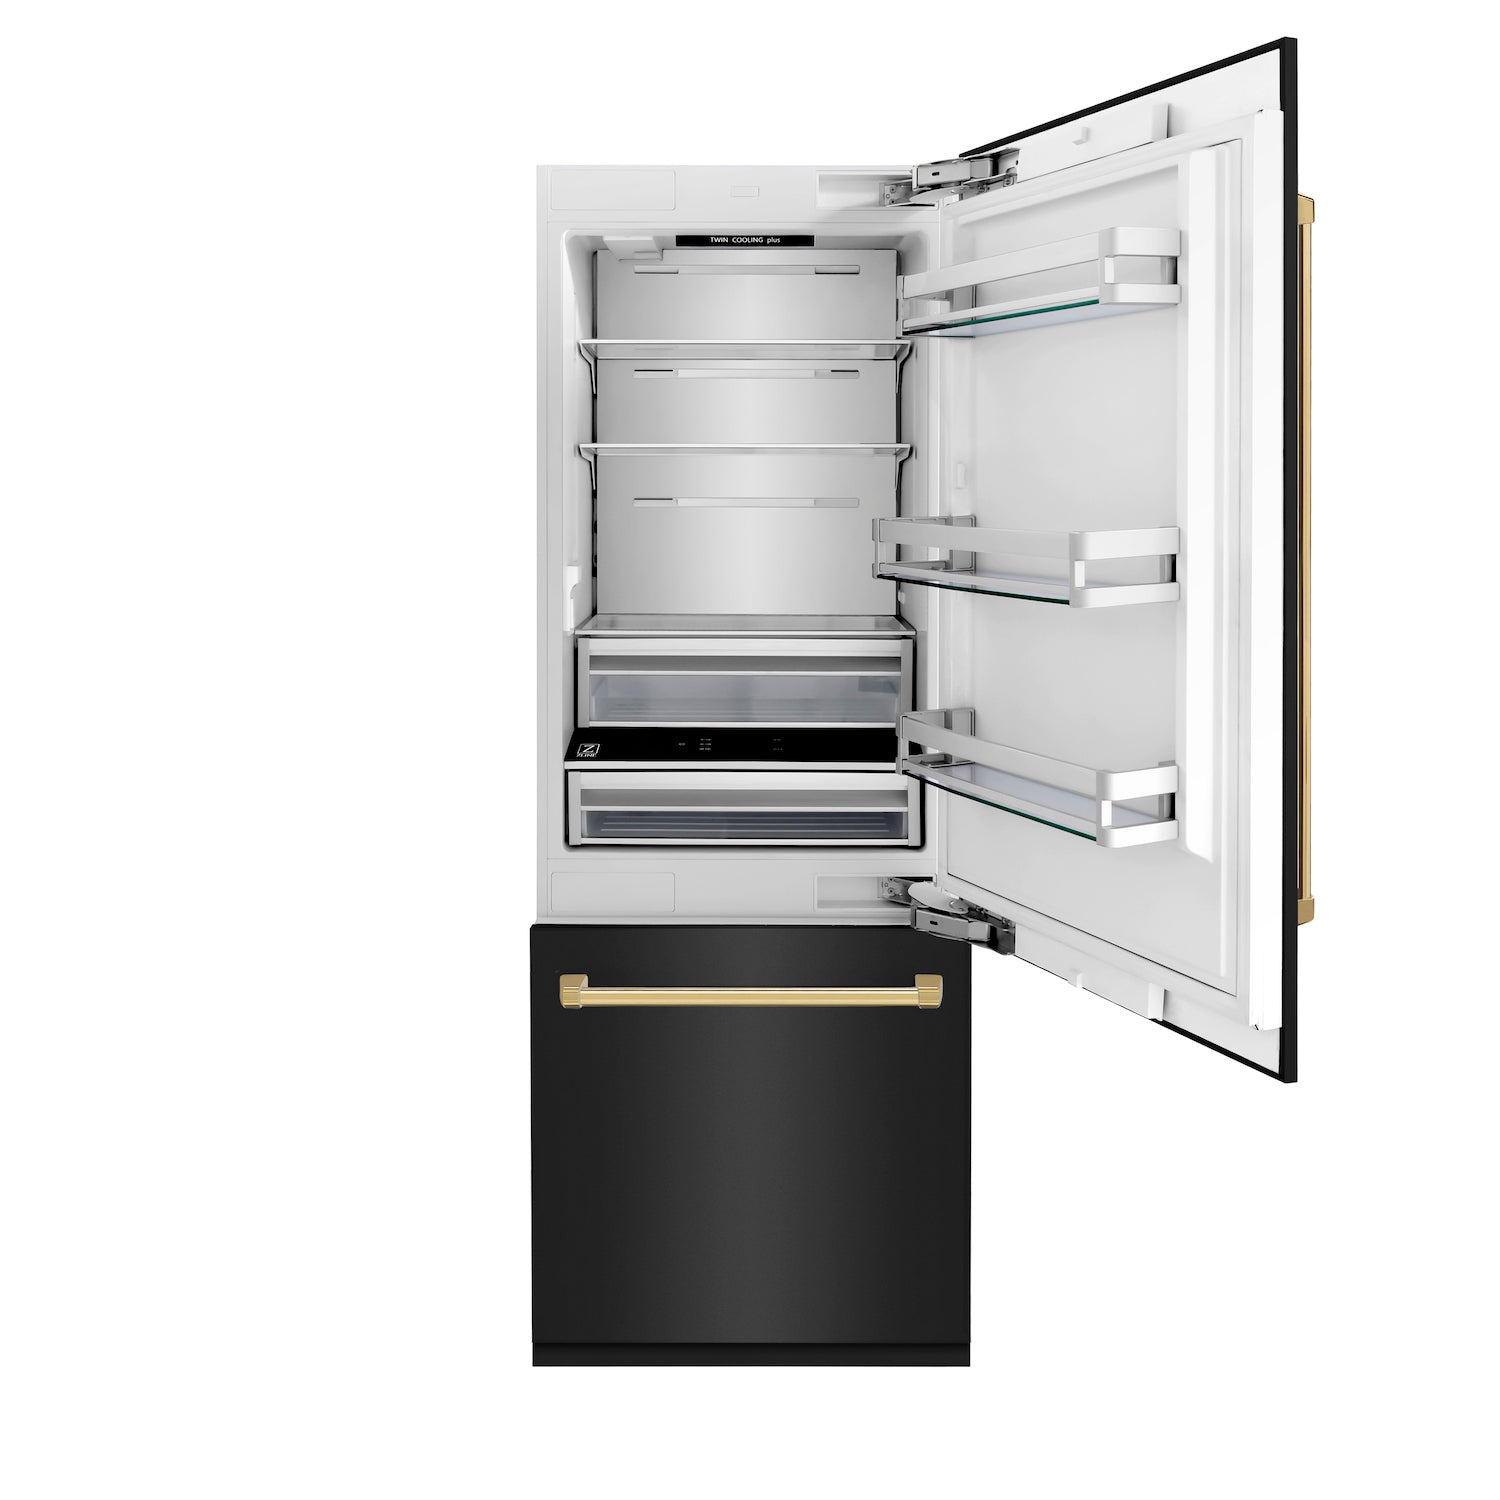 ZLINE Autograph Edition 30 in. 16.1 cu. ft. Built-in 2-Door Bottom Freezer Refrigerator with Internal Water and Ice Dispenser in Black Stainless Steel with Polished Gold Accents (RBIVZ-BS-30-G) front, open.